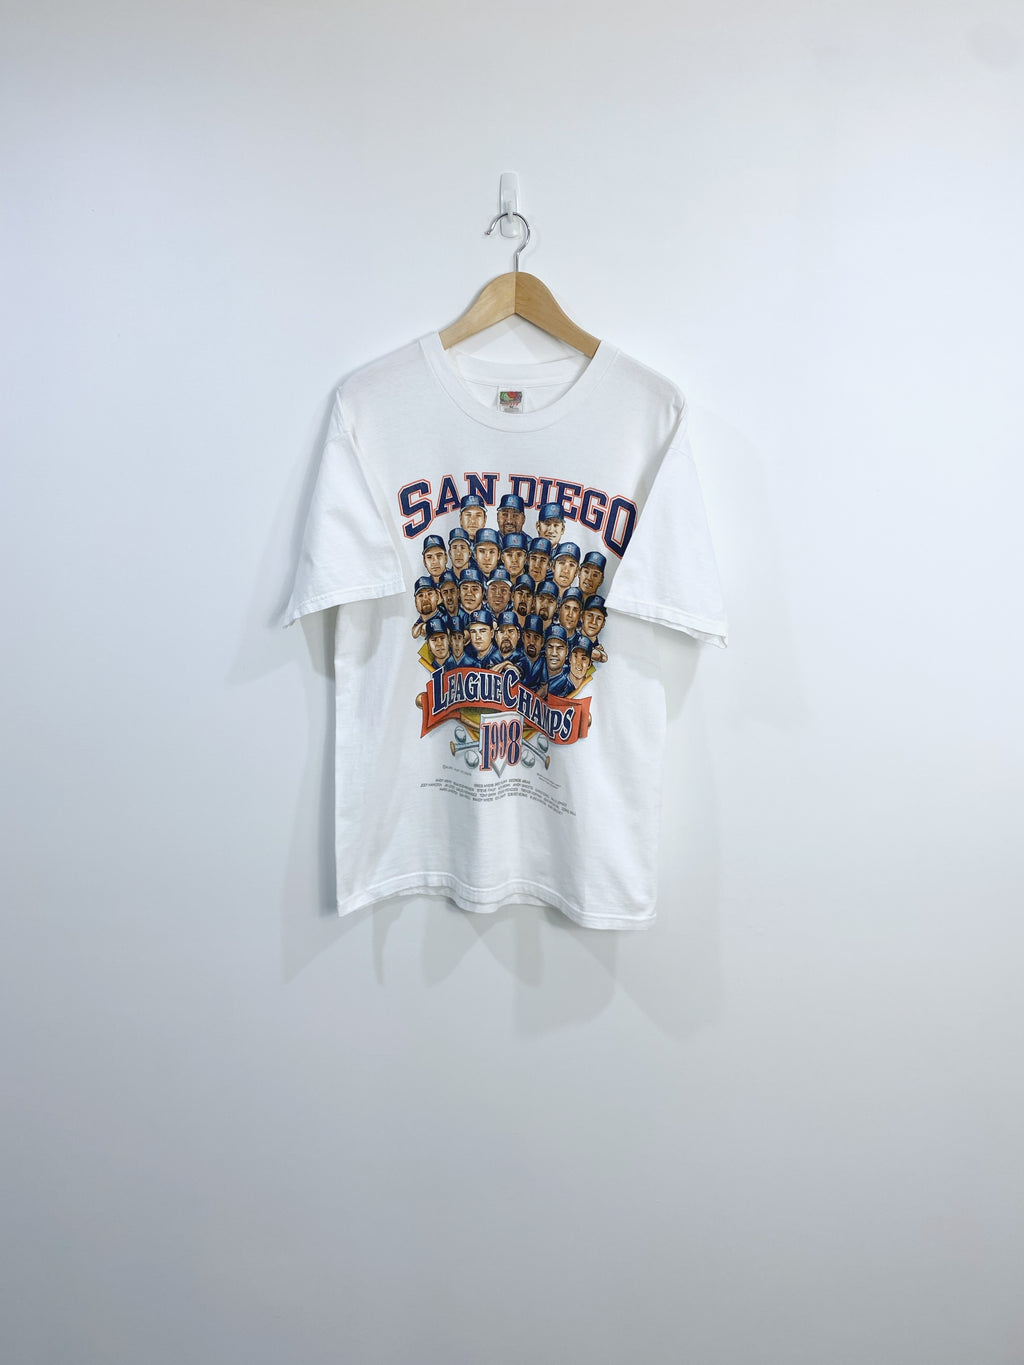 Vintage 1998 San Diego Chargers Championship T-shirt M